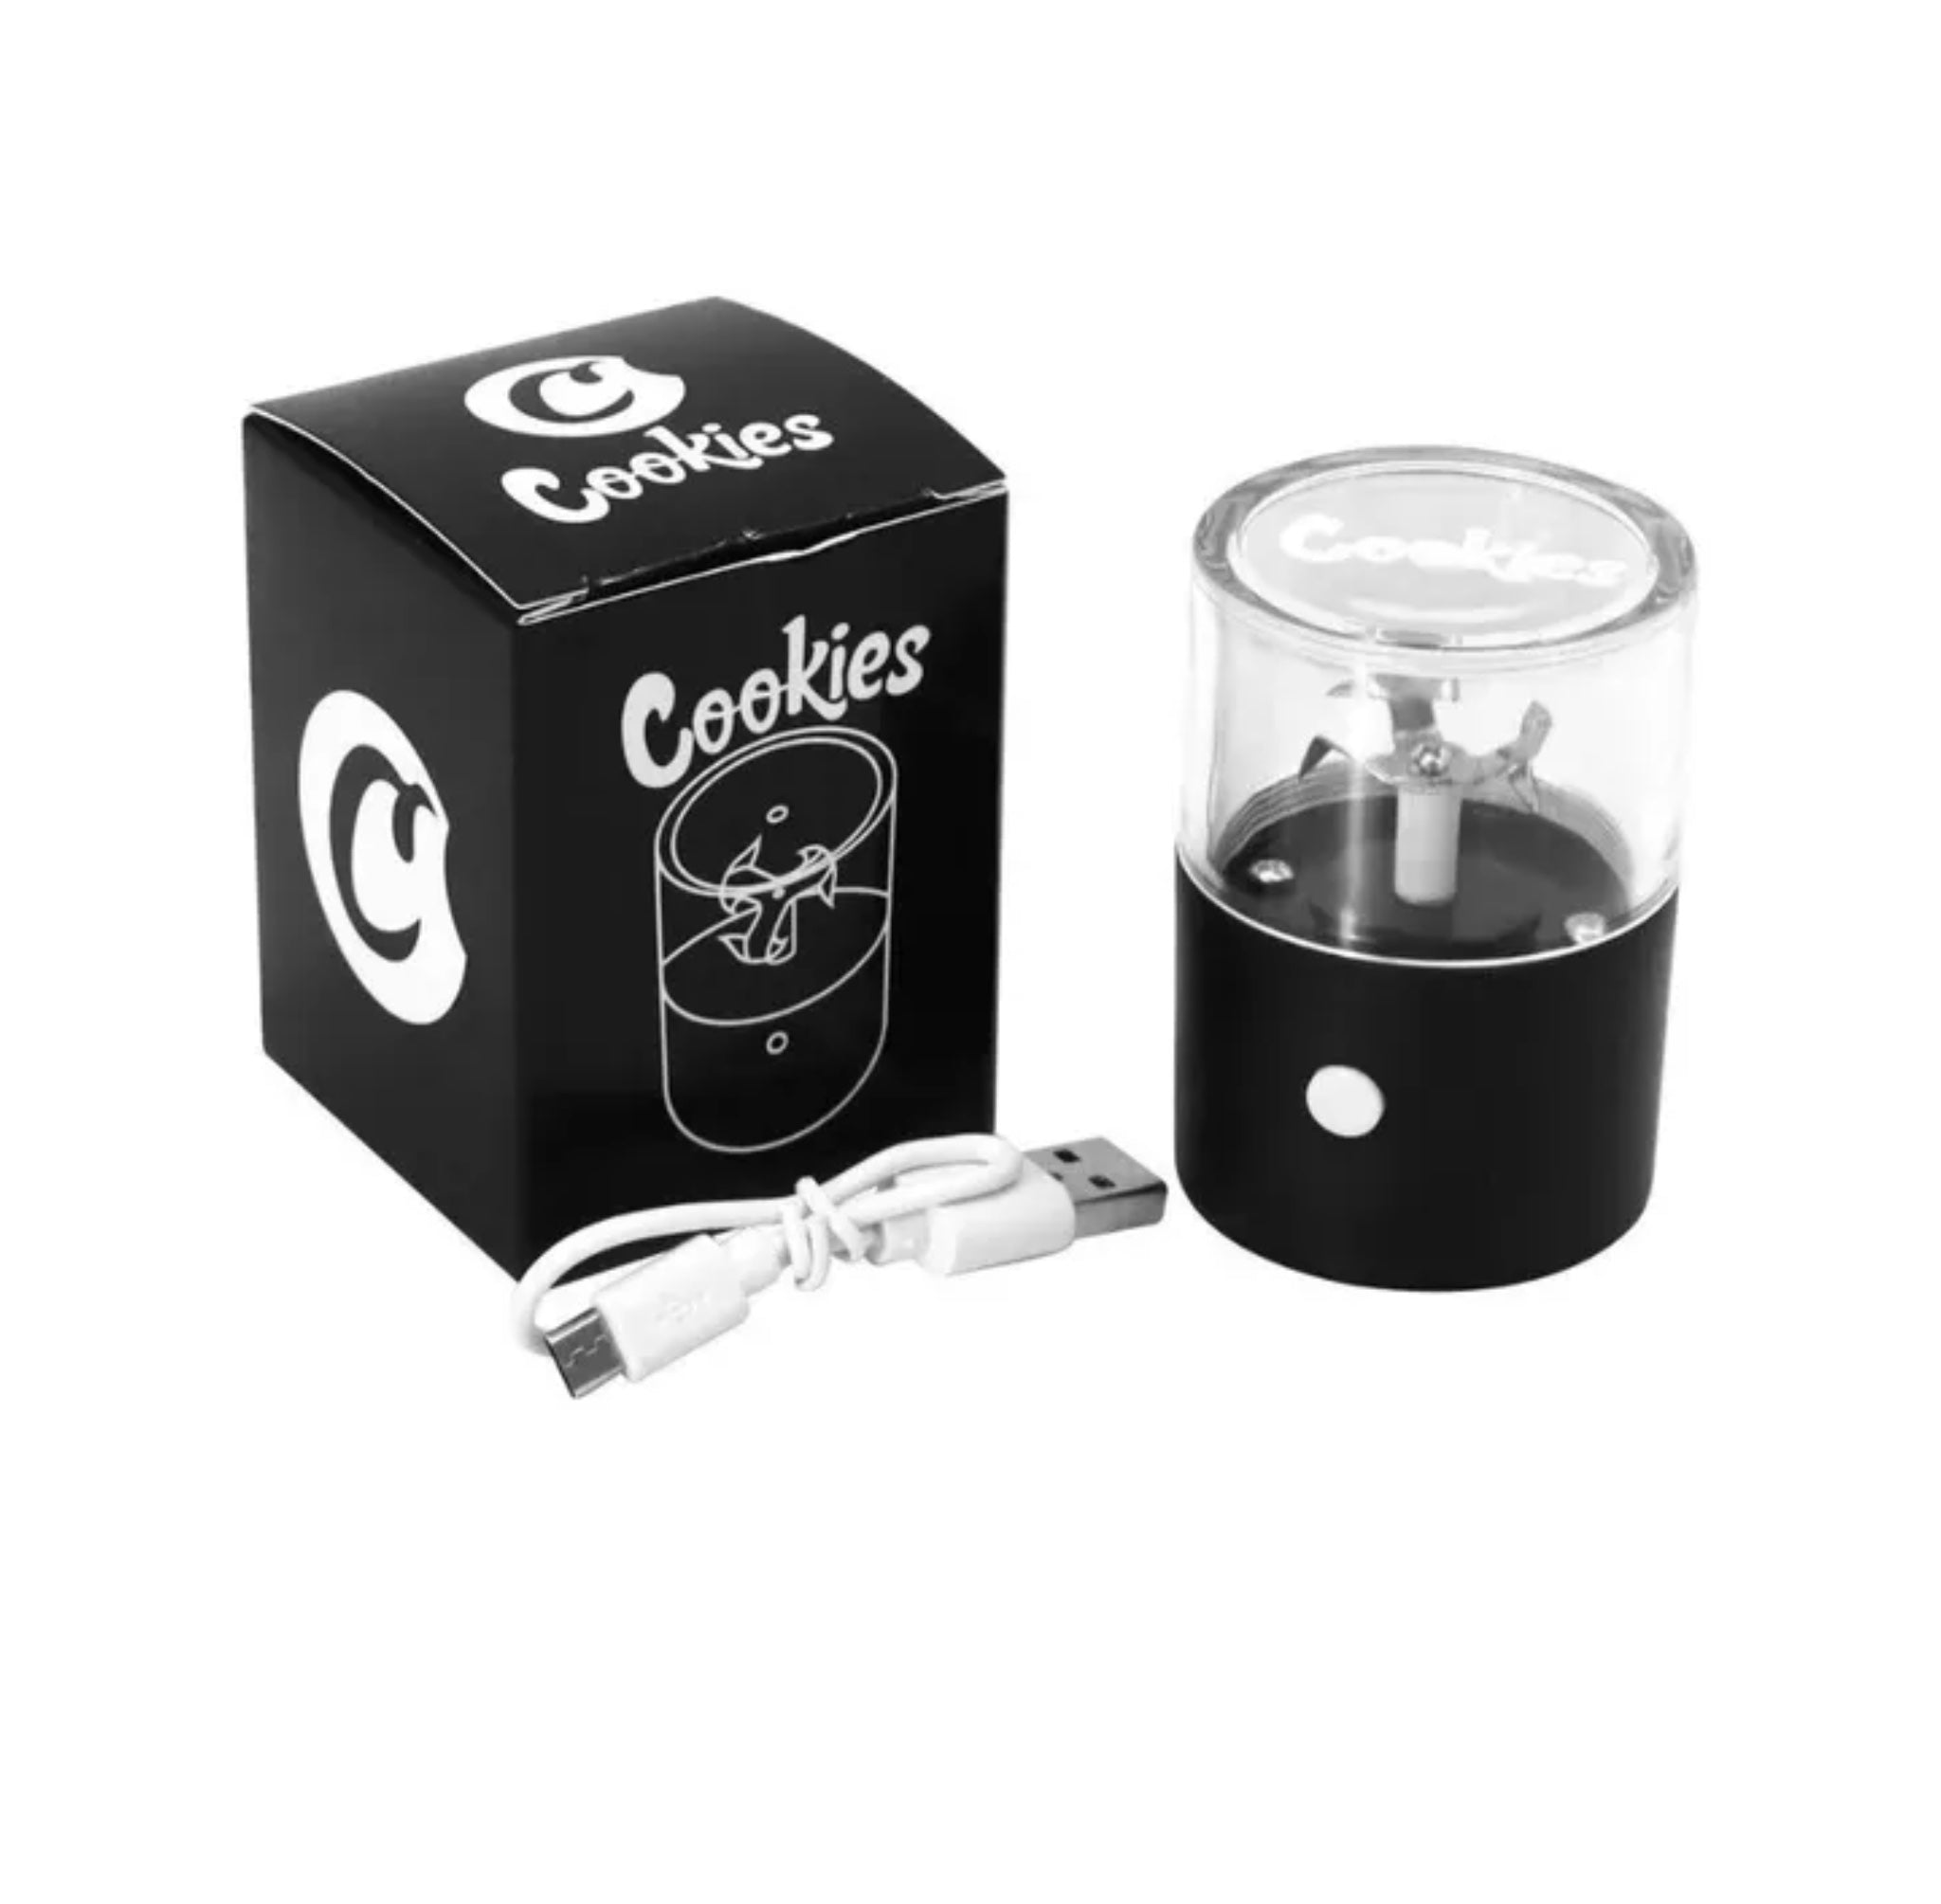 Ezee Electric Herb Grinder - Smell Proof Stuff